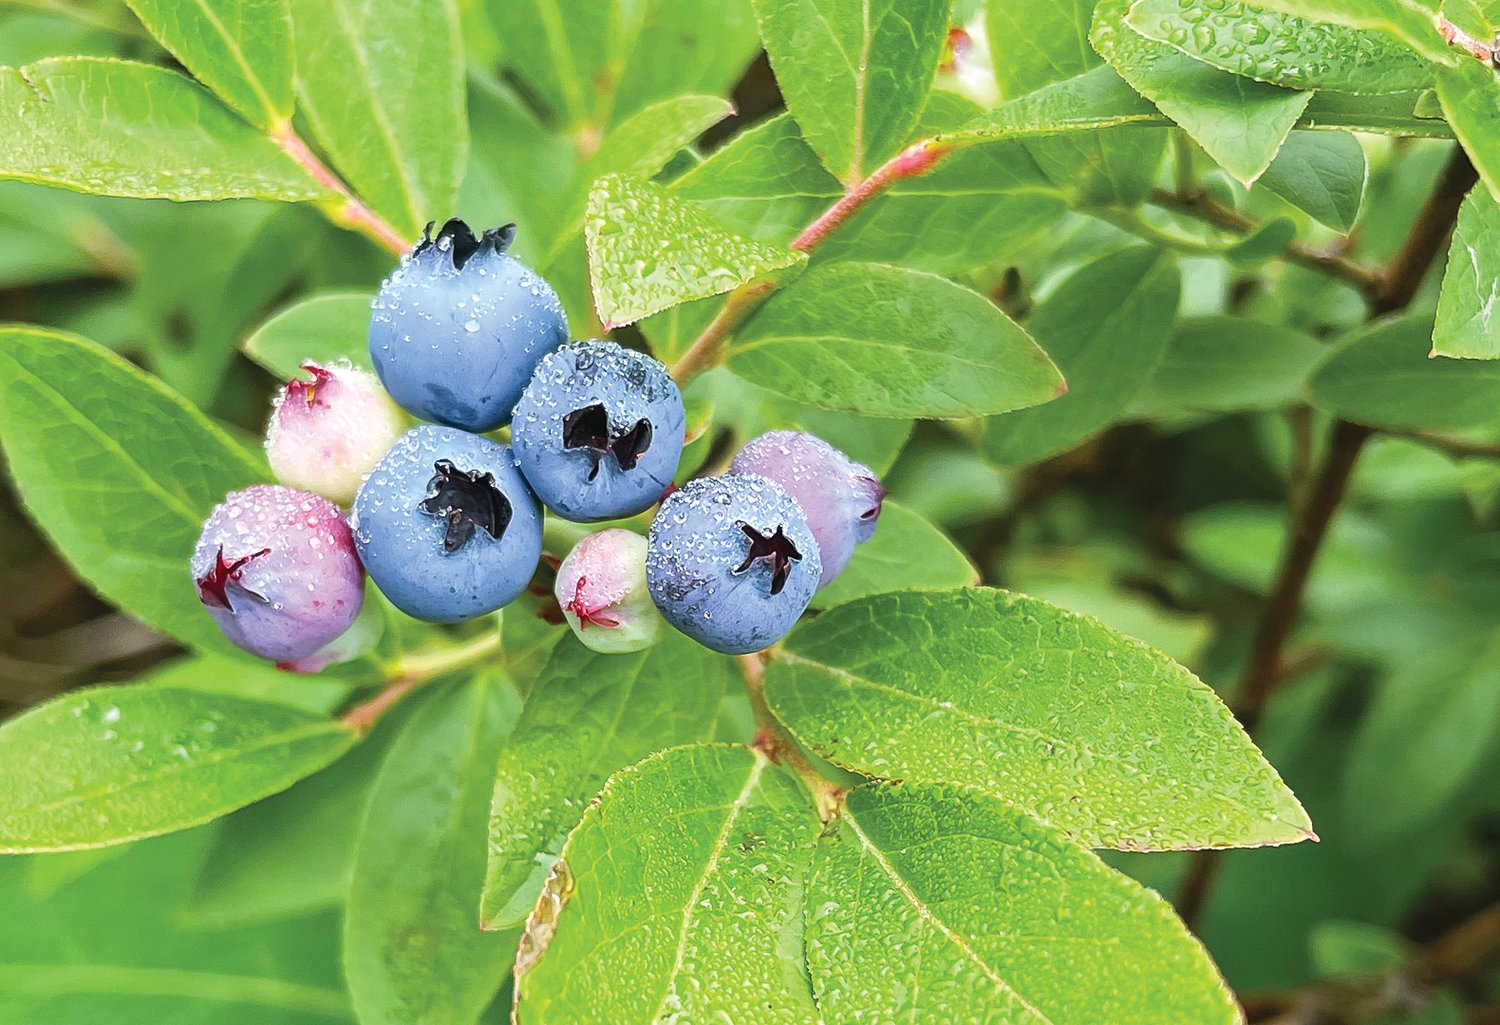 It appears that the area is experiencing one of the best blueberry crops in the past few years. Last year’s drought prompted many plants to kick seed production into overdrive and that means this year’s berry crop is looking plentiful.